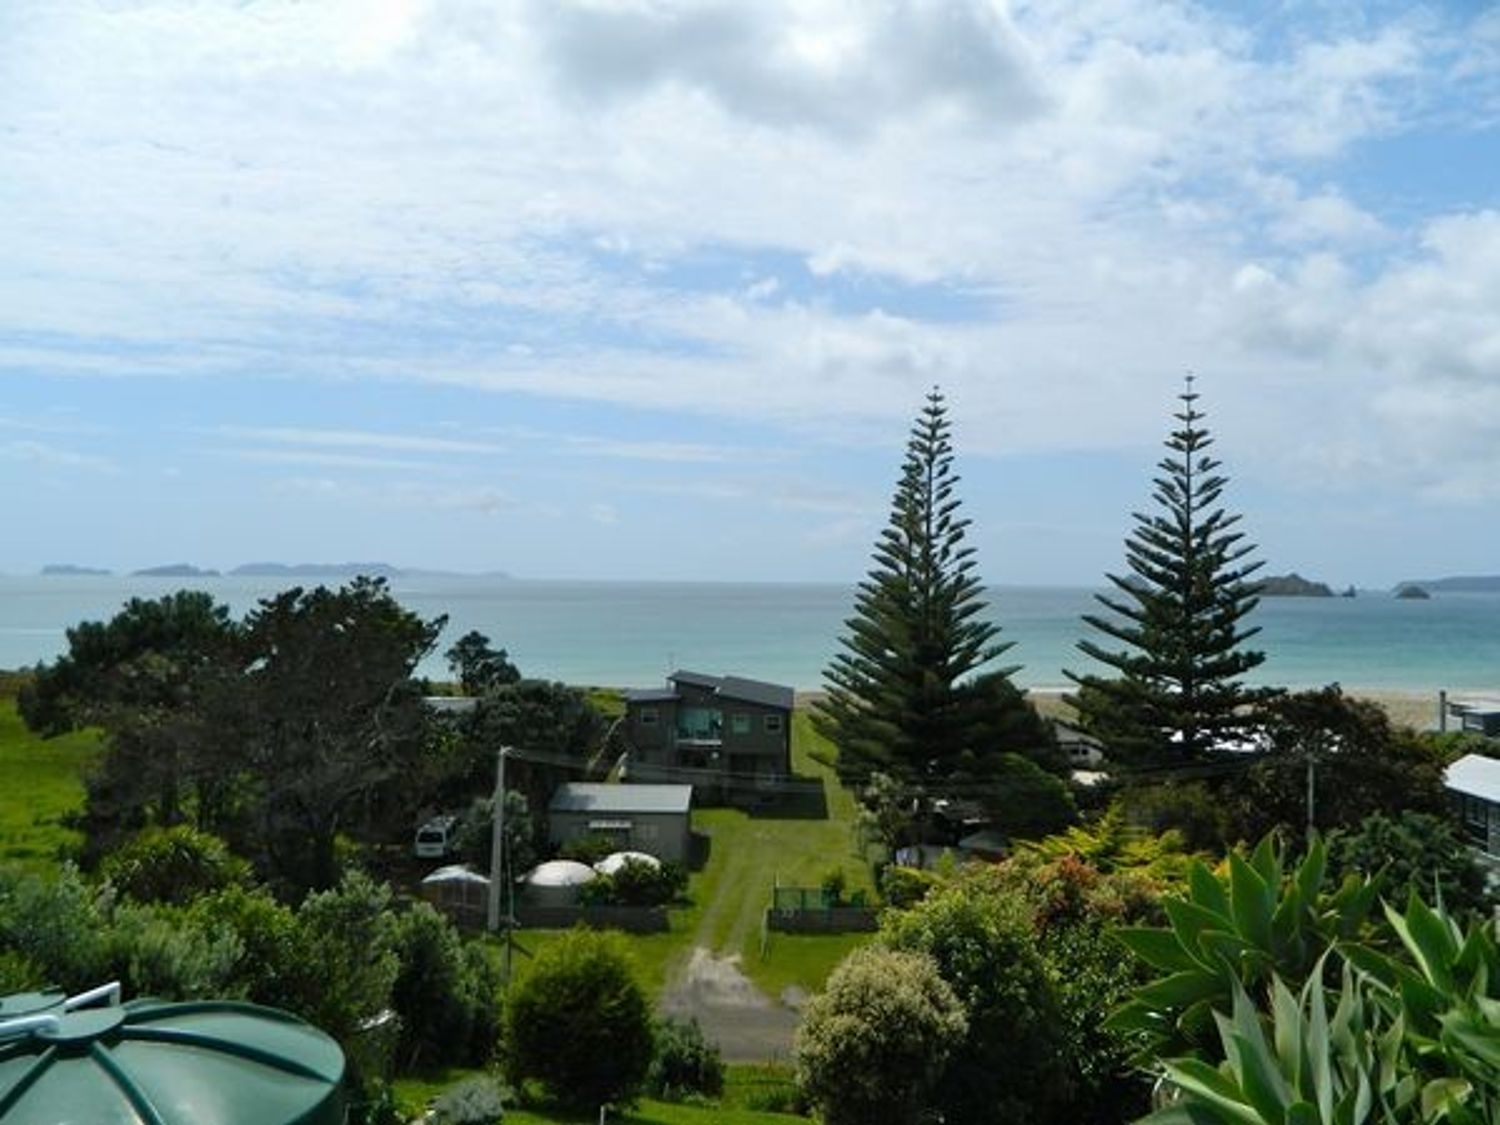 Bach With a View - Opito Bay Bach -  - 1029120 - photo 1